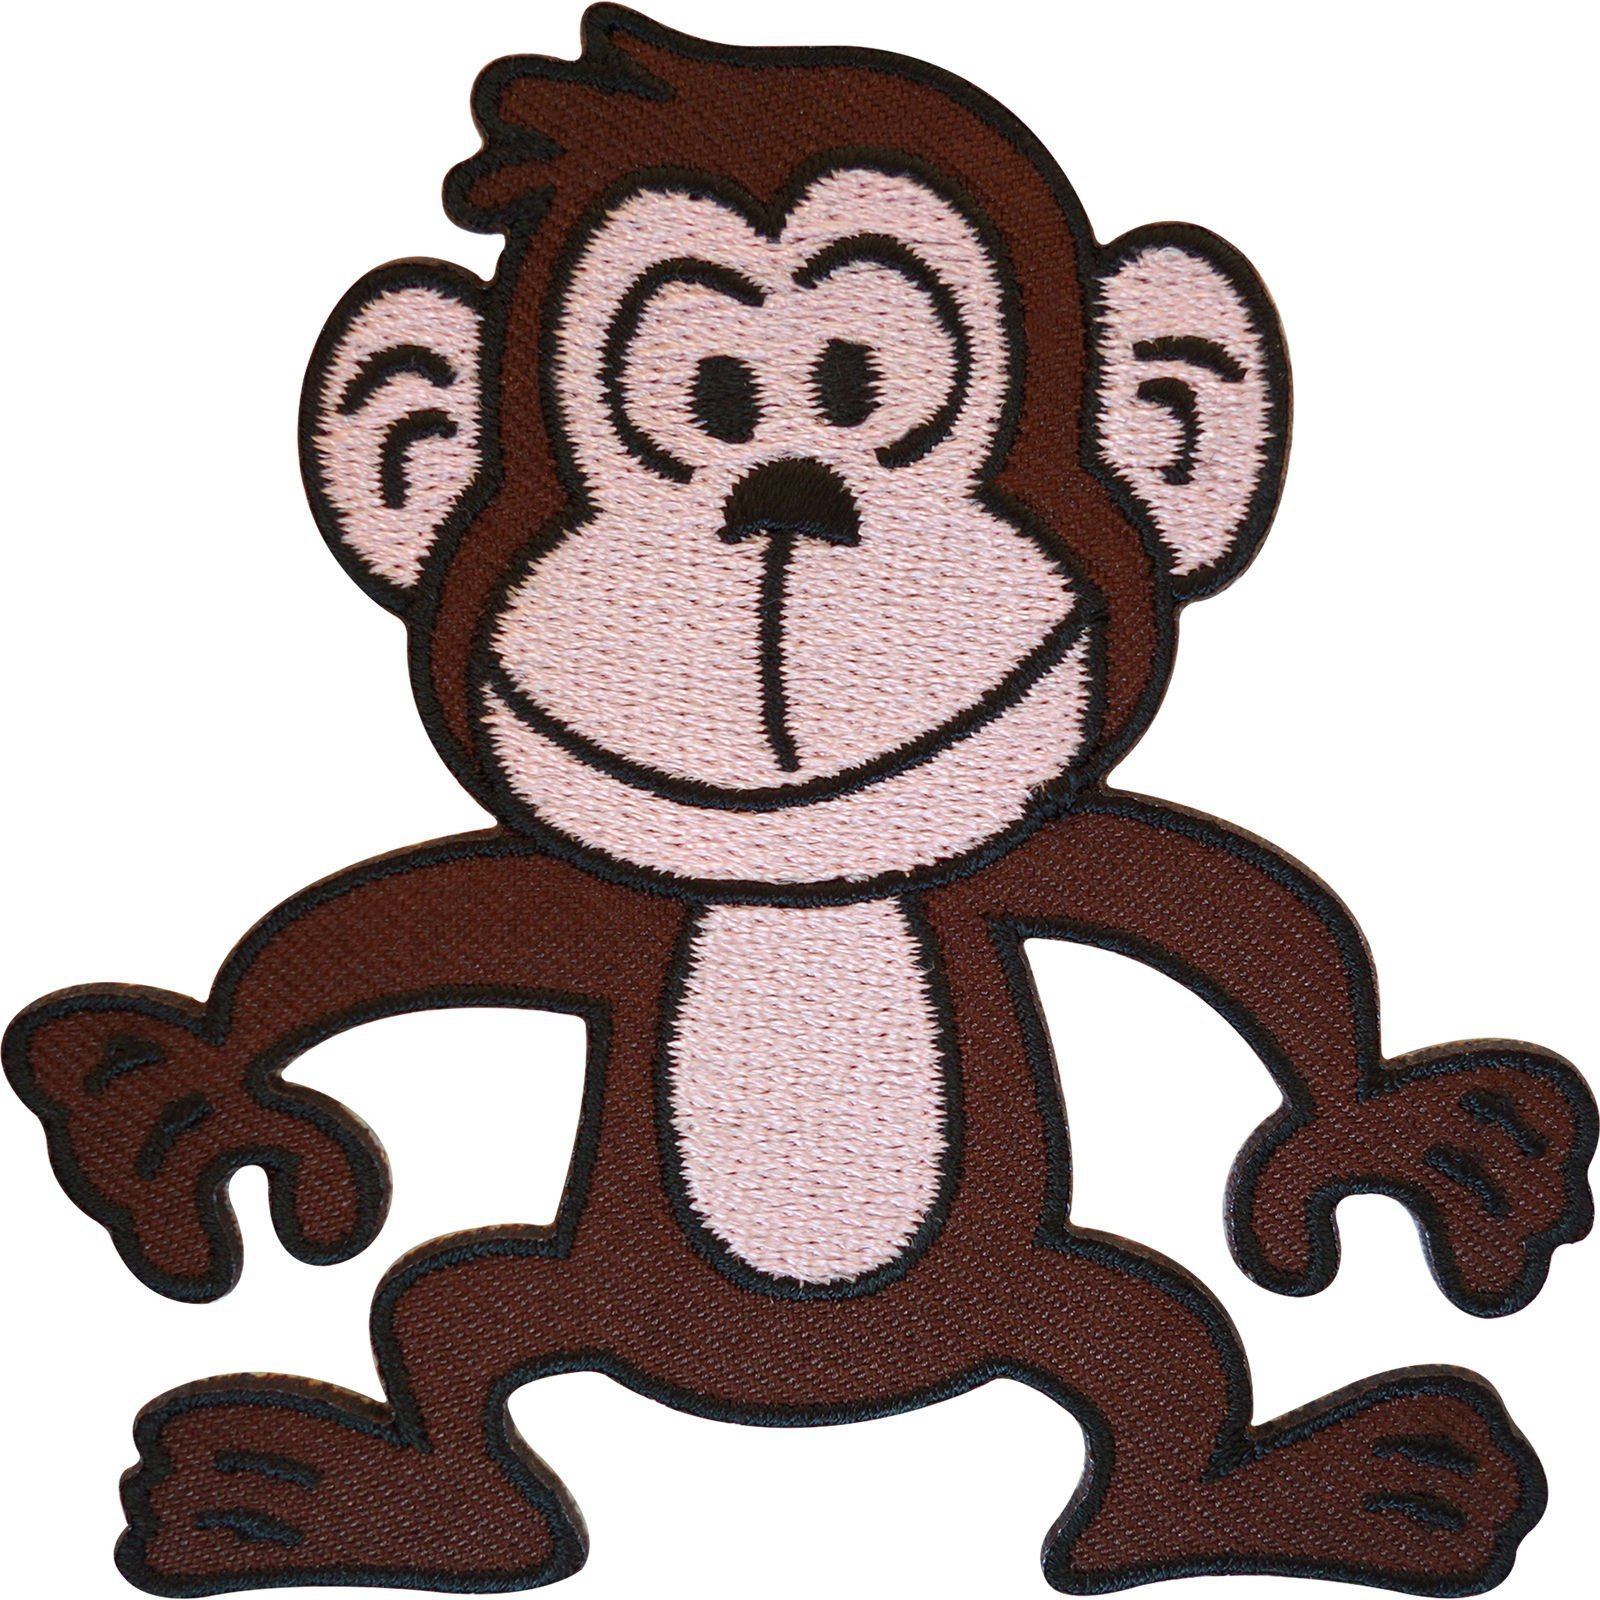 Embroidered Monkey Iron On Badge Sew On Patch Chimp Ape Jeans Shirt Bag Applique